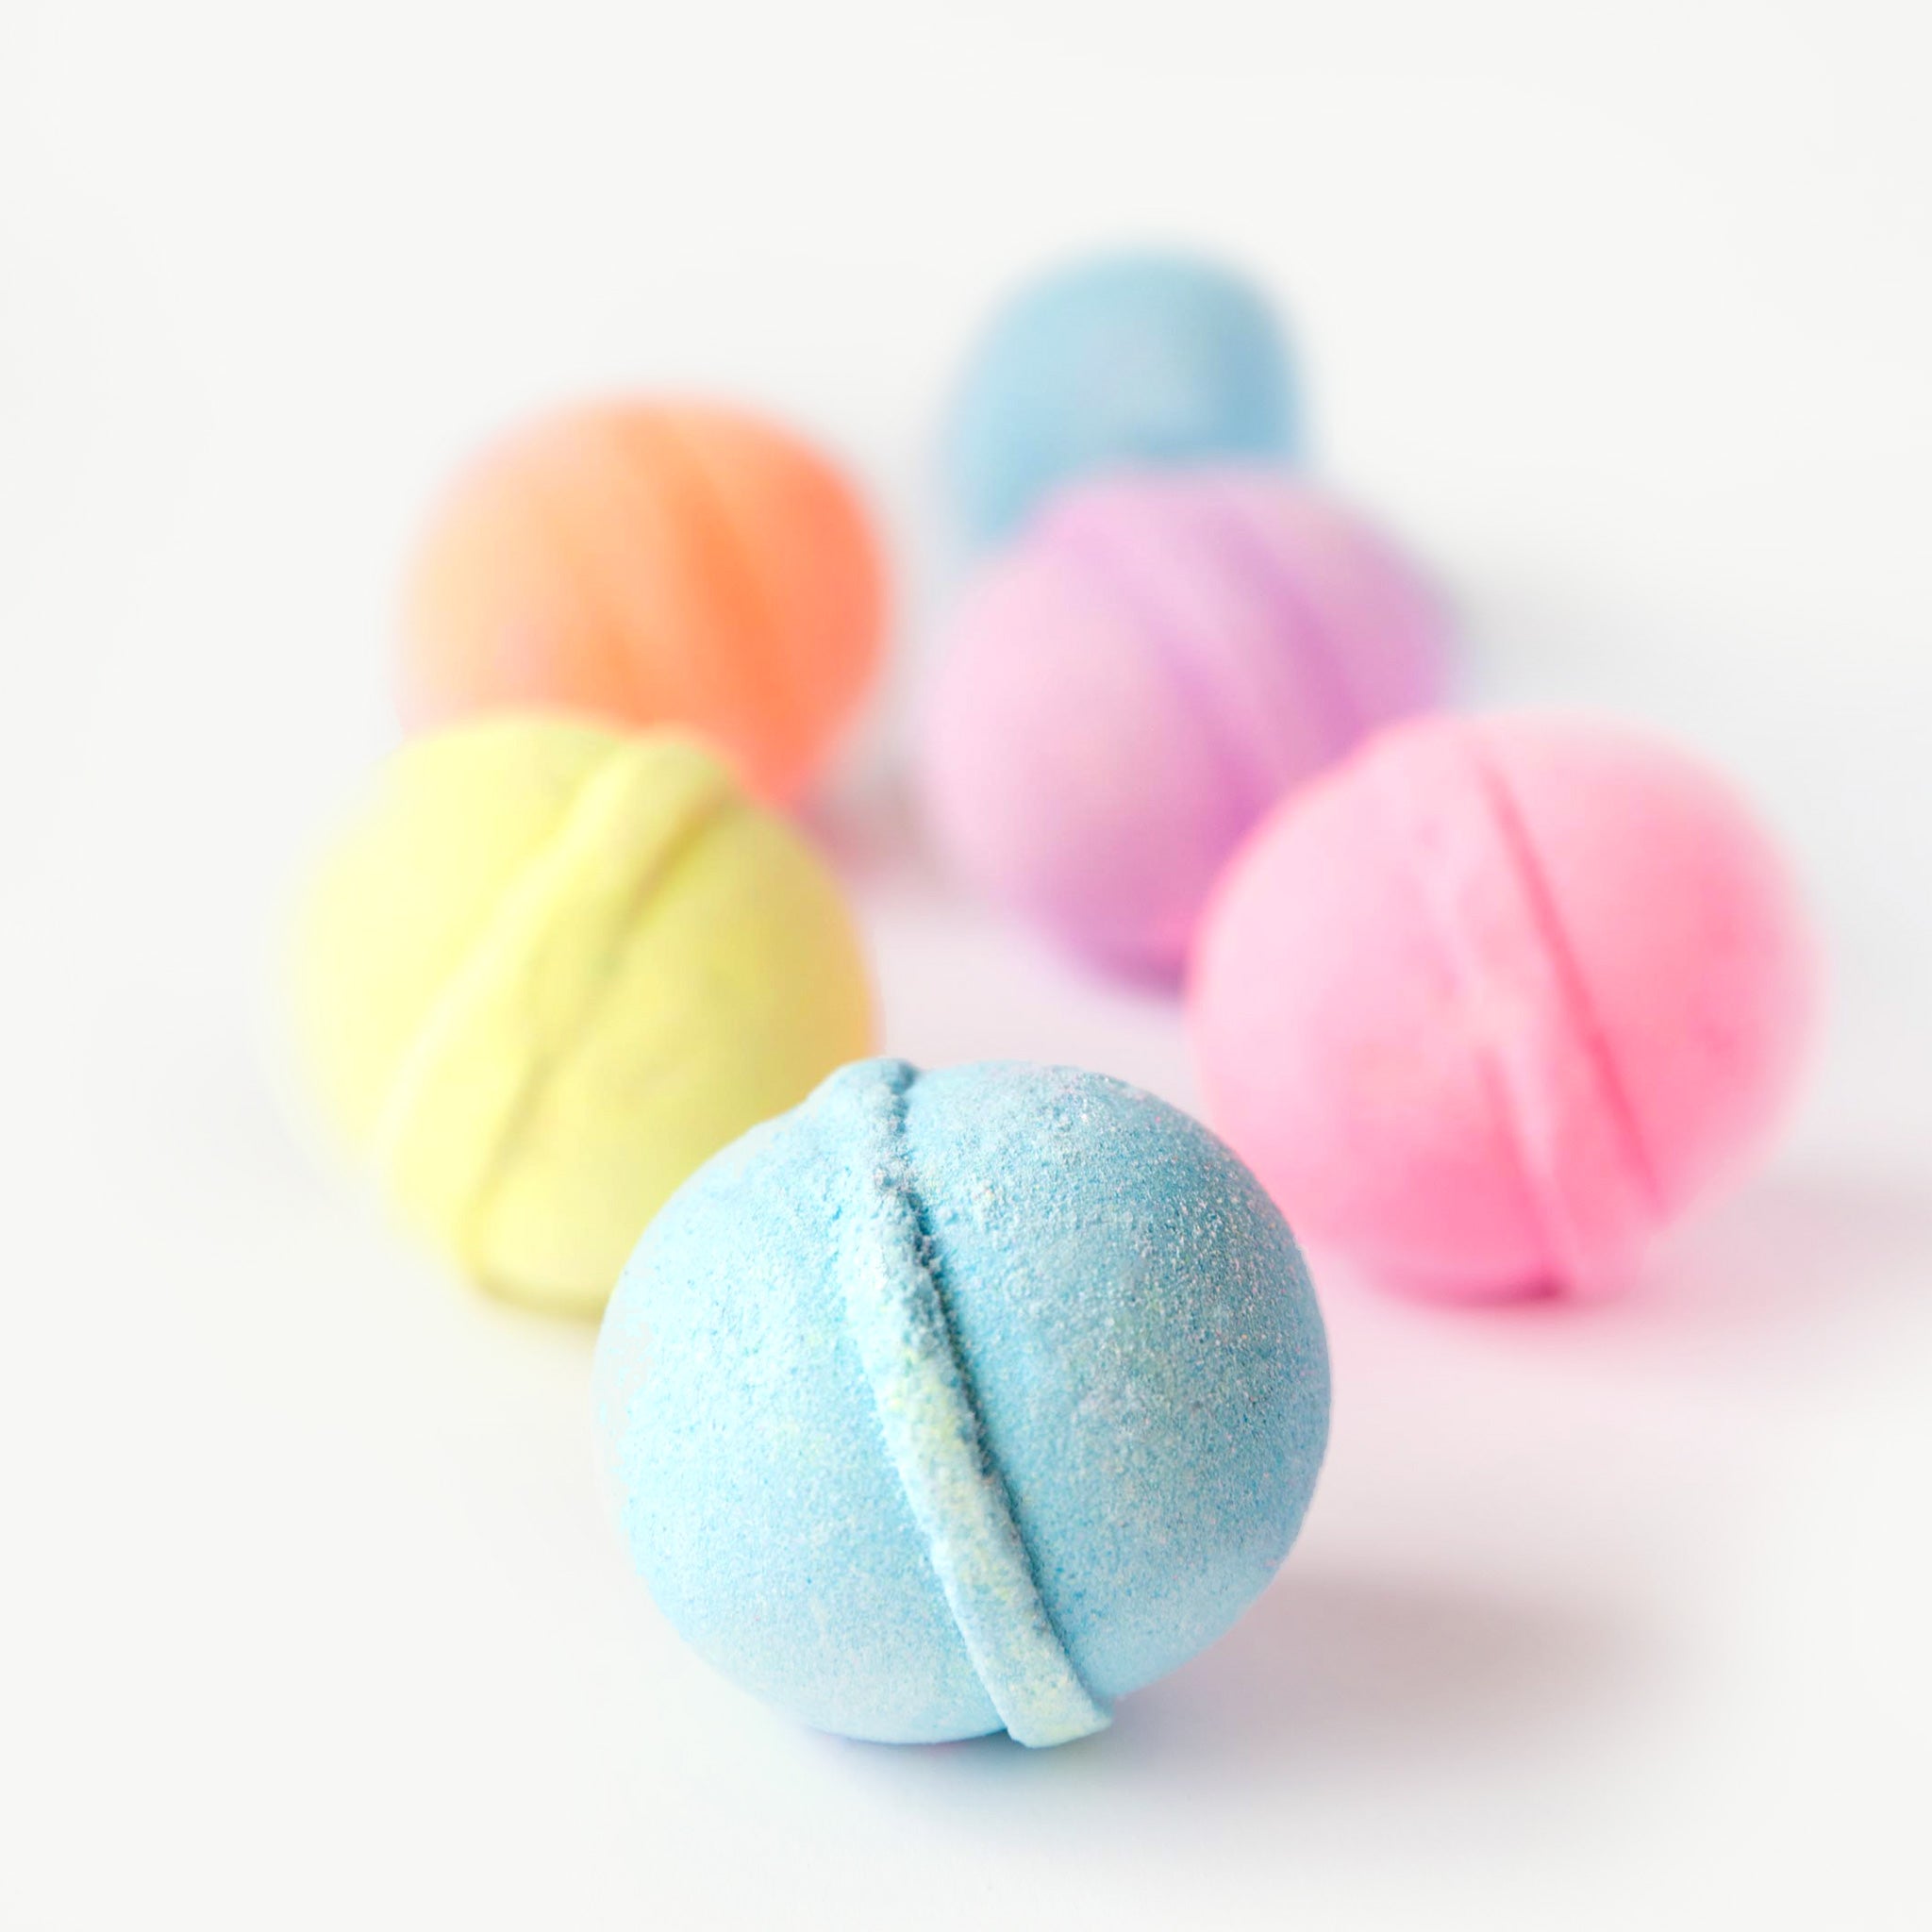    Oh-Flossy-Kids-Natural-Makeup-Multi-colour-bath-bombs-01